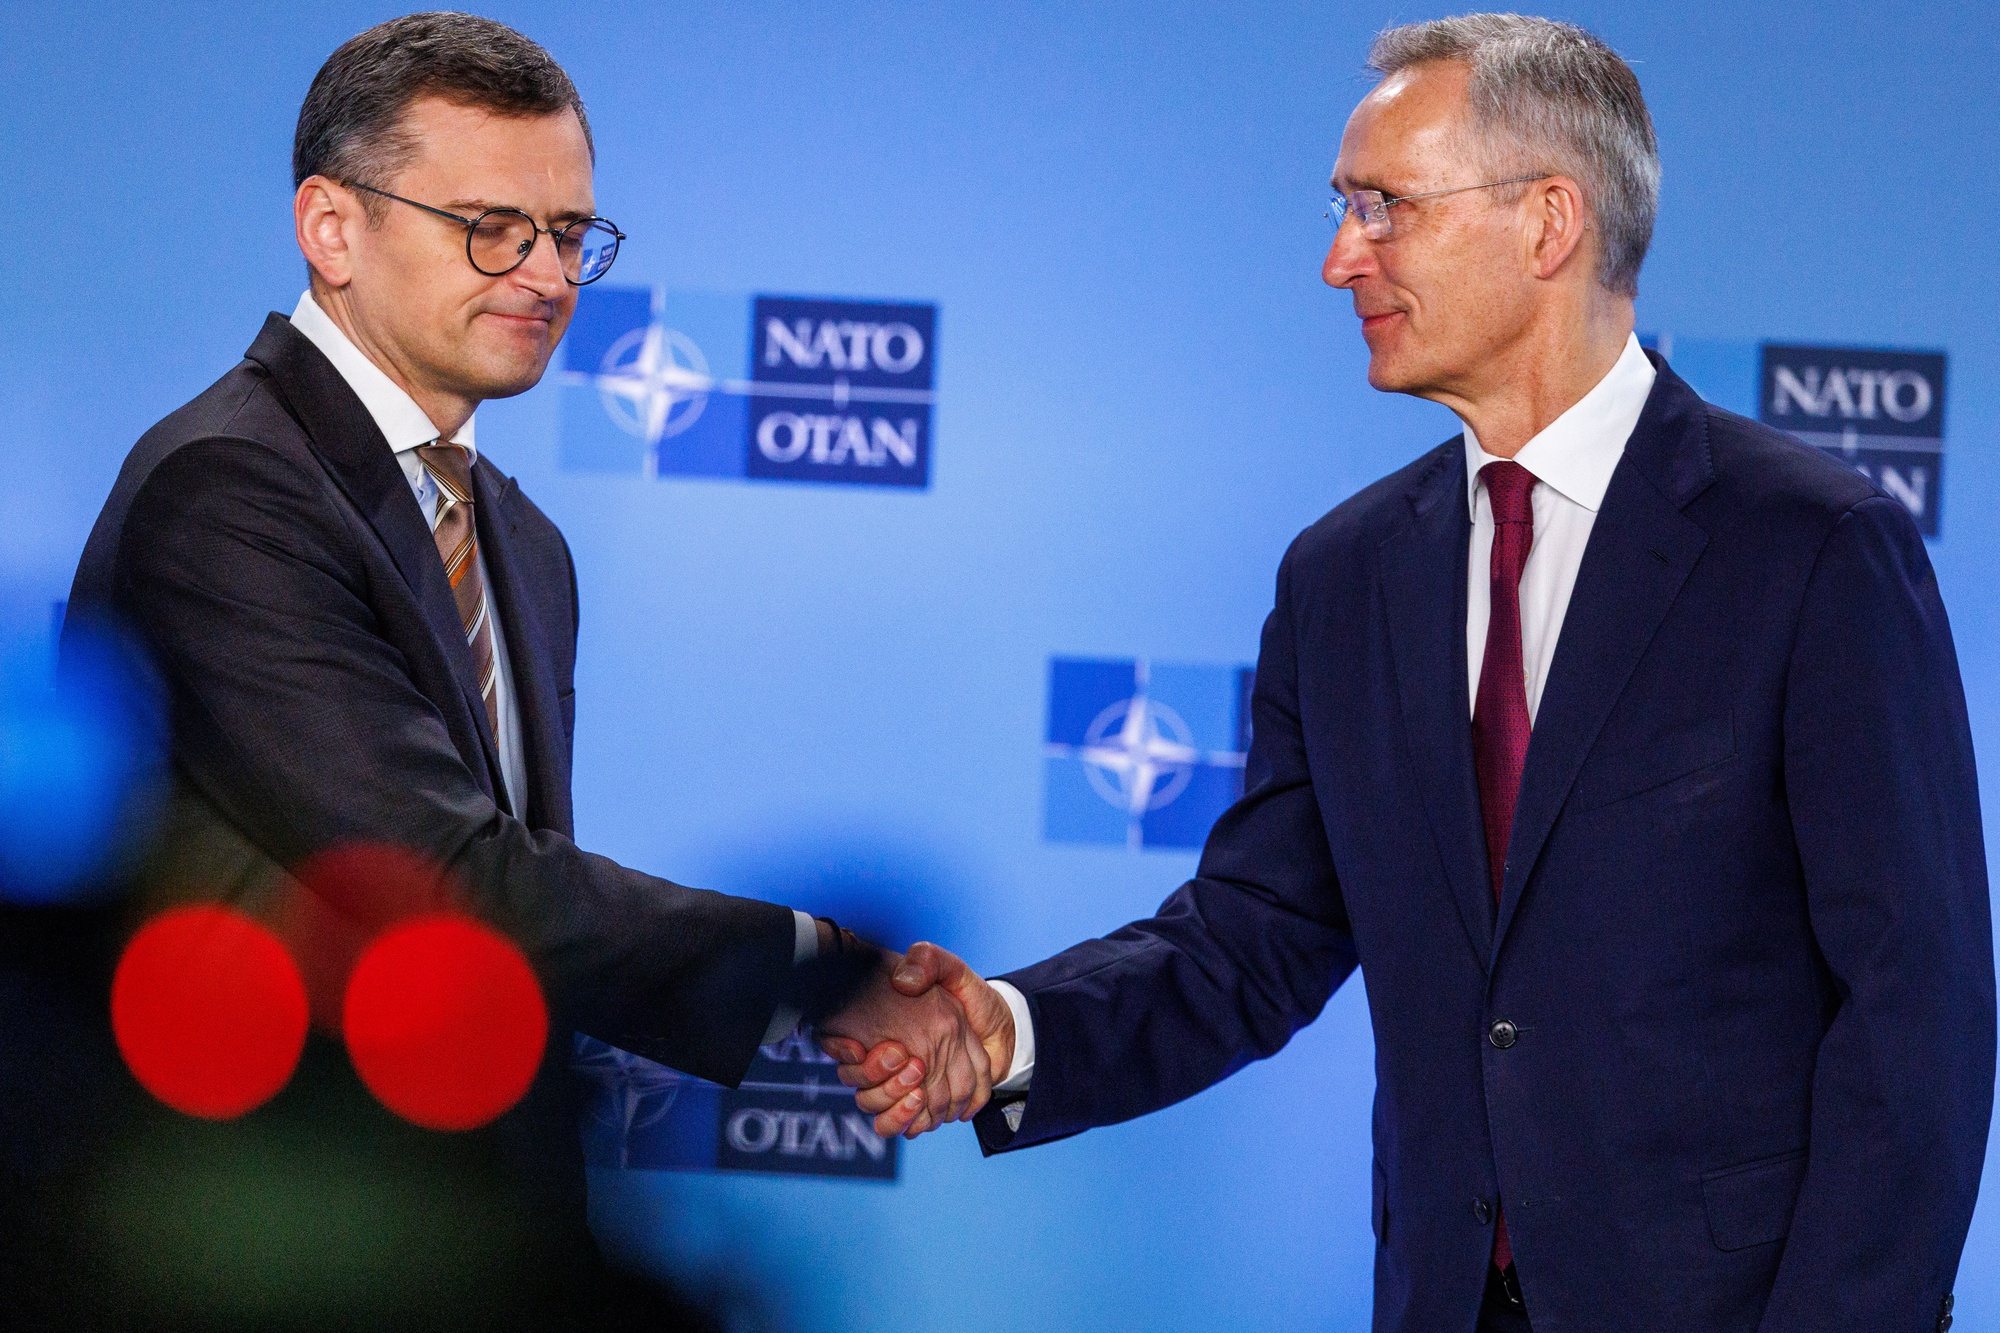 epa11258440 Ukraine&#039;s Foreign Minister Dmytro Kuleba (L) and NATO Secretary-General Jens Stoltenberg shake hands as they deliver a statement during NATO’s 75th anniversary celebration in the Agora to commemorate 75 years of NATO foundation during a North Atlantic Treaty Organization (NATO) Foreign Affairs Ministers meeting in Brussels, Belgium, 04 April 2024. Allied Foreign Affairs Ministers attend a meeting of NATO Ministers of Foreign Affairs at NATO Headquarters in Brussels on 03-04 April as NATO celebrates its 75th anniversary. On 04 April 1949, the 12 founding countries signed the North Atlantic Treaty, called the Washington Treaty. It committed each member to share the risk, responsibilities, and benefits of collective defense.  EPA/OLIVIER MATTHYS